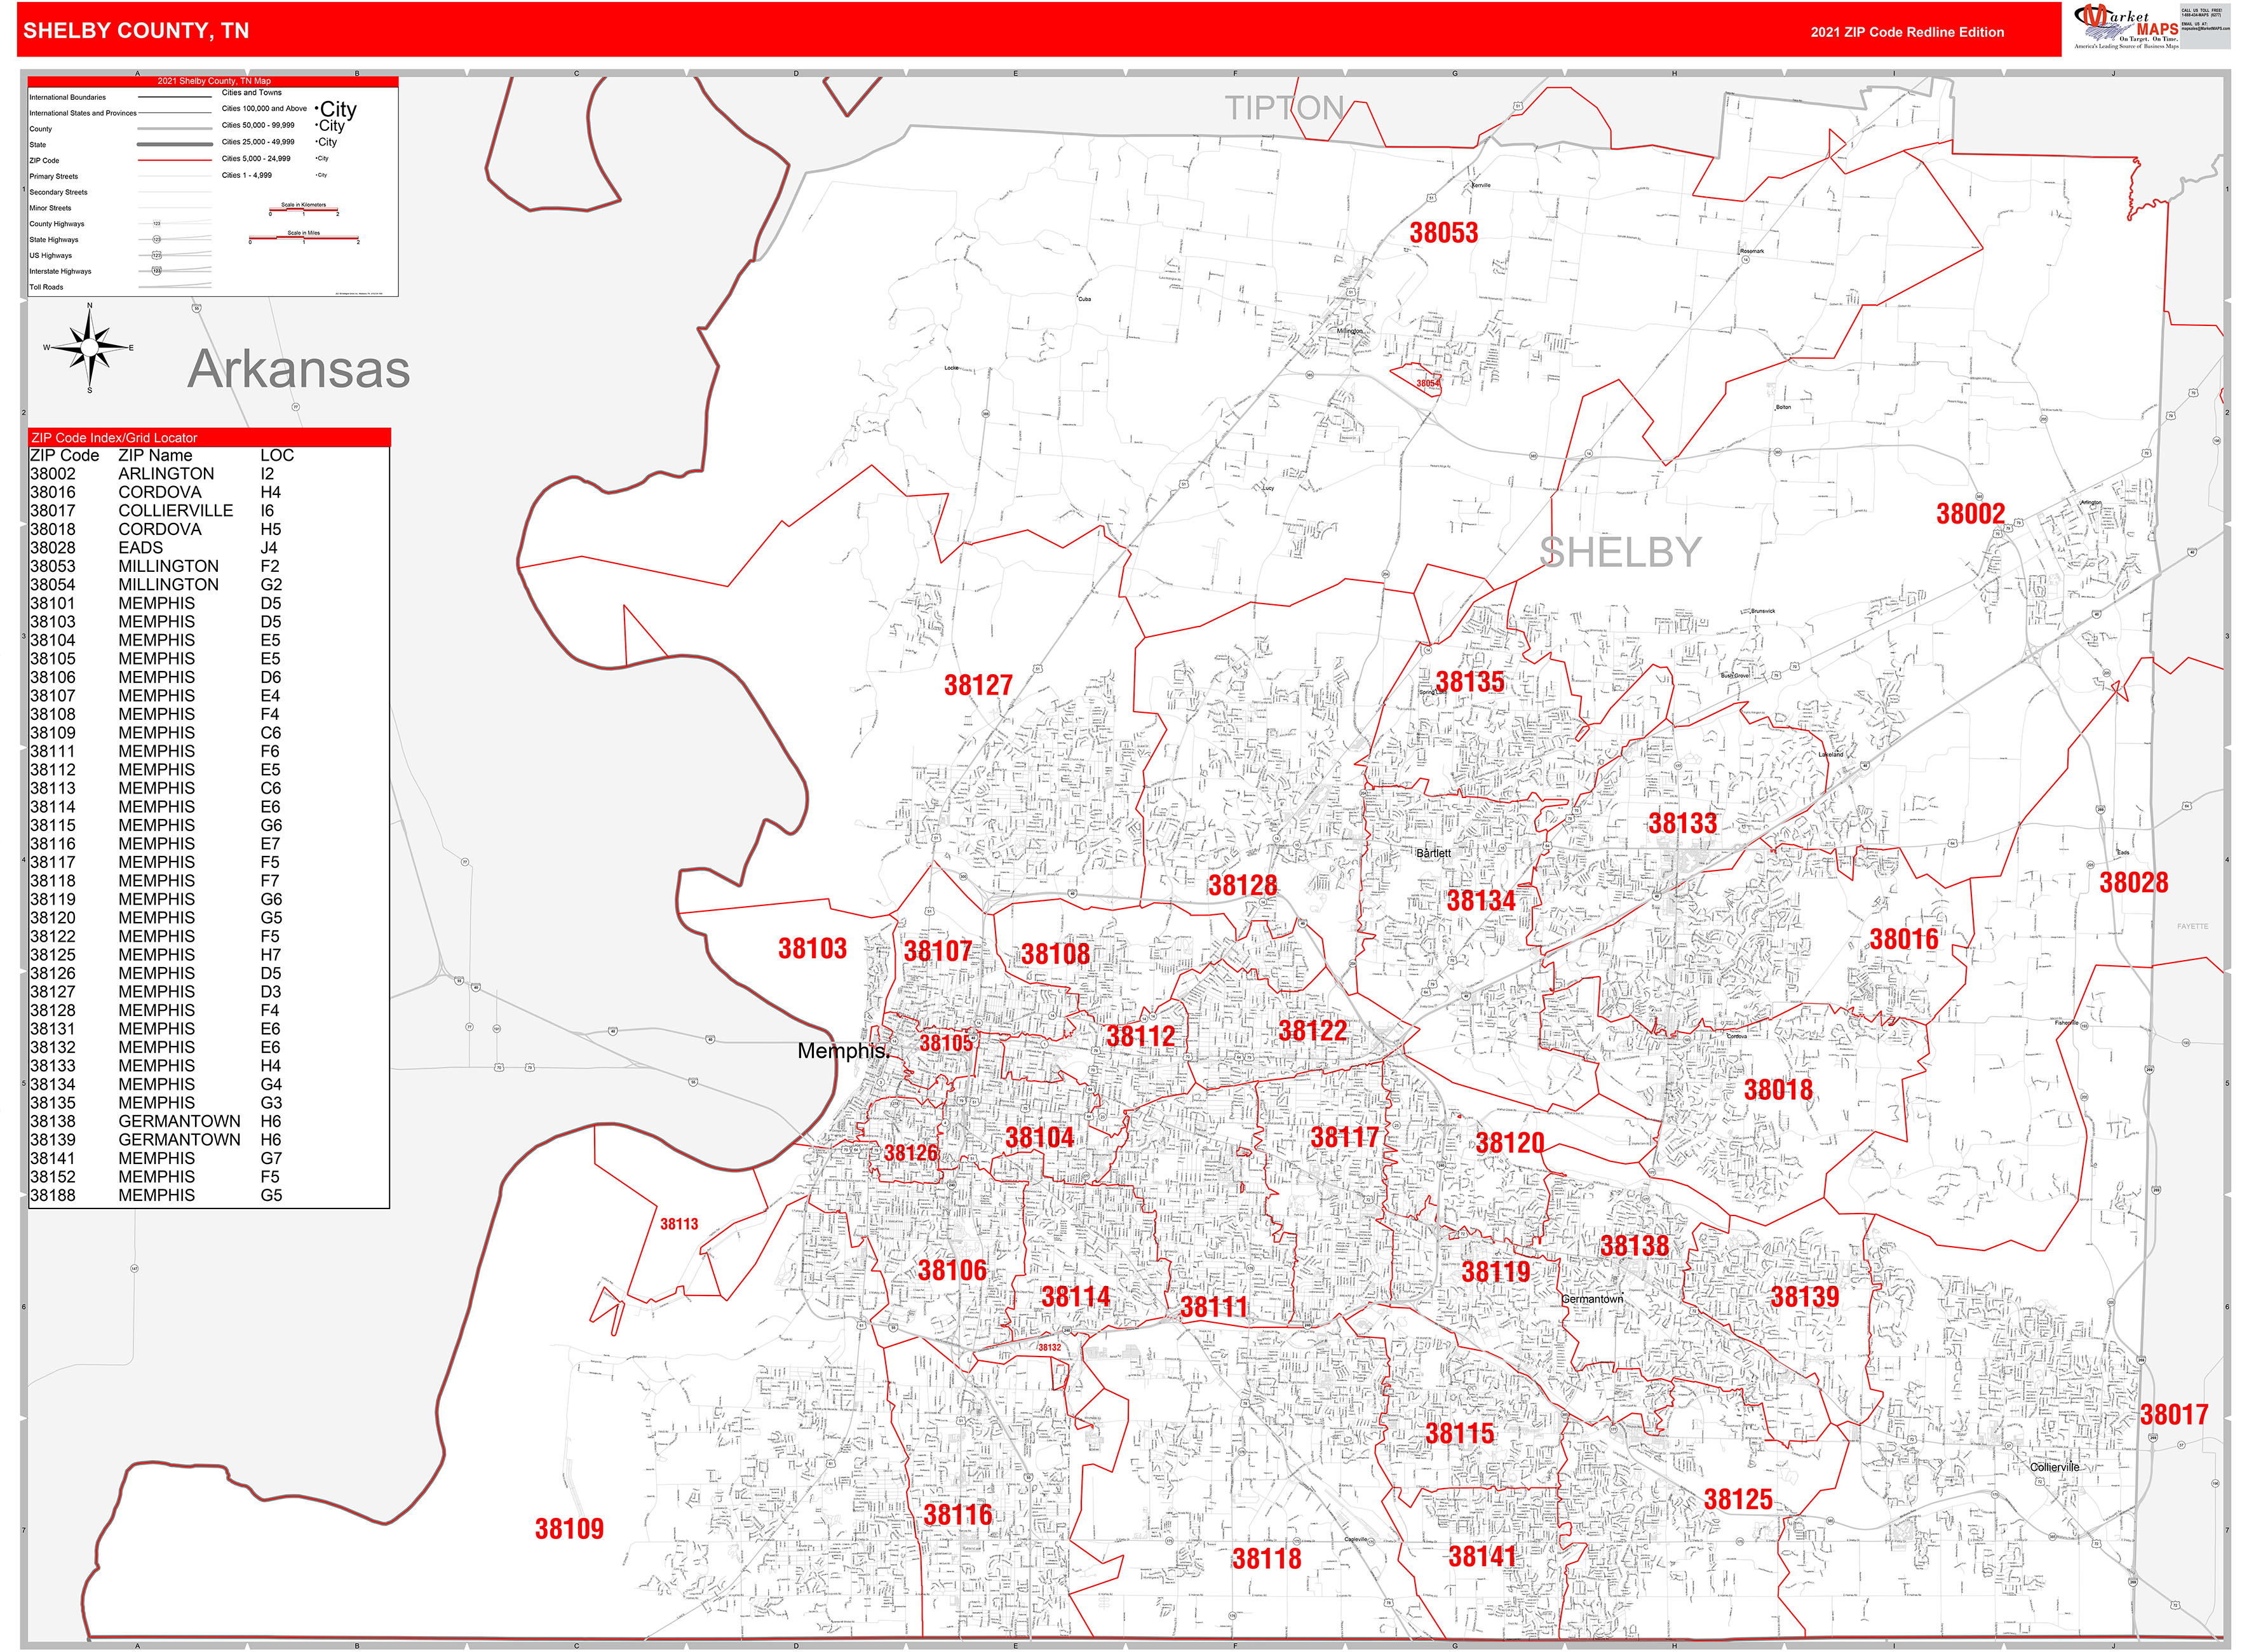 Shelby County Tn Zip Code Wall Map Red Line Style By Marketmaps Mapsales 2310